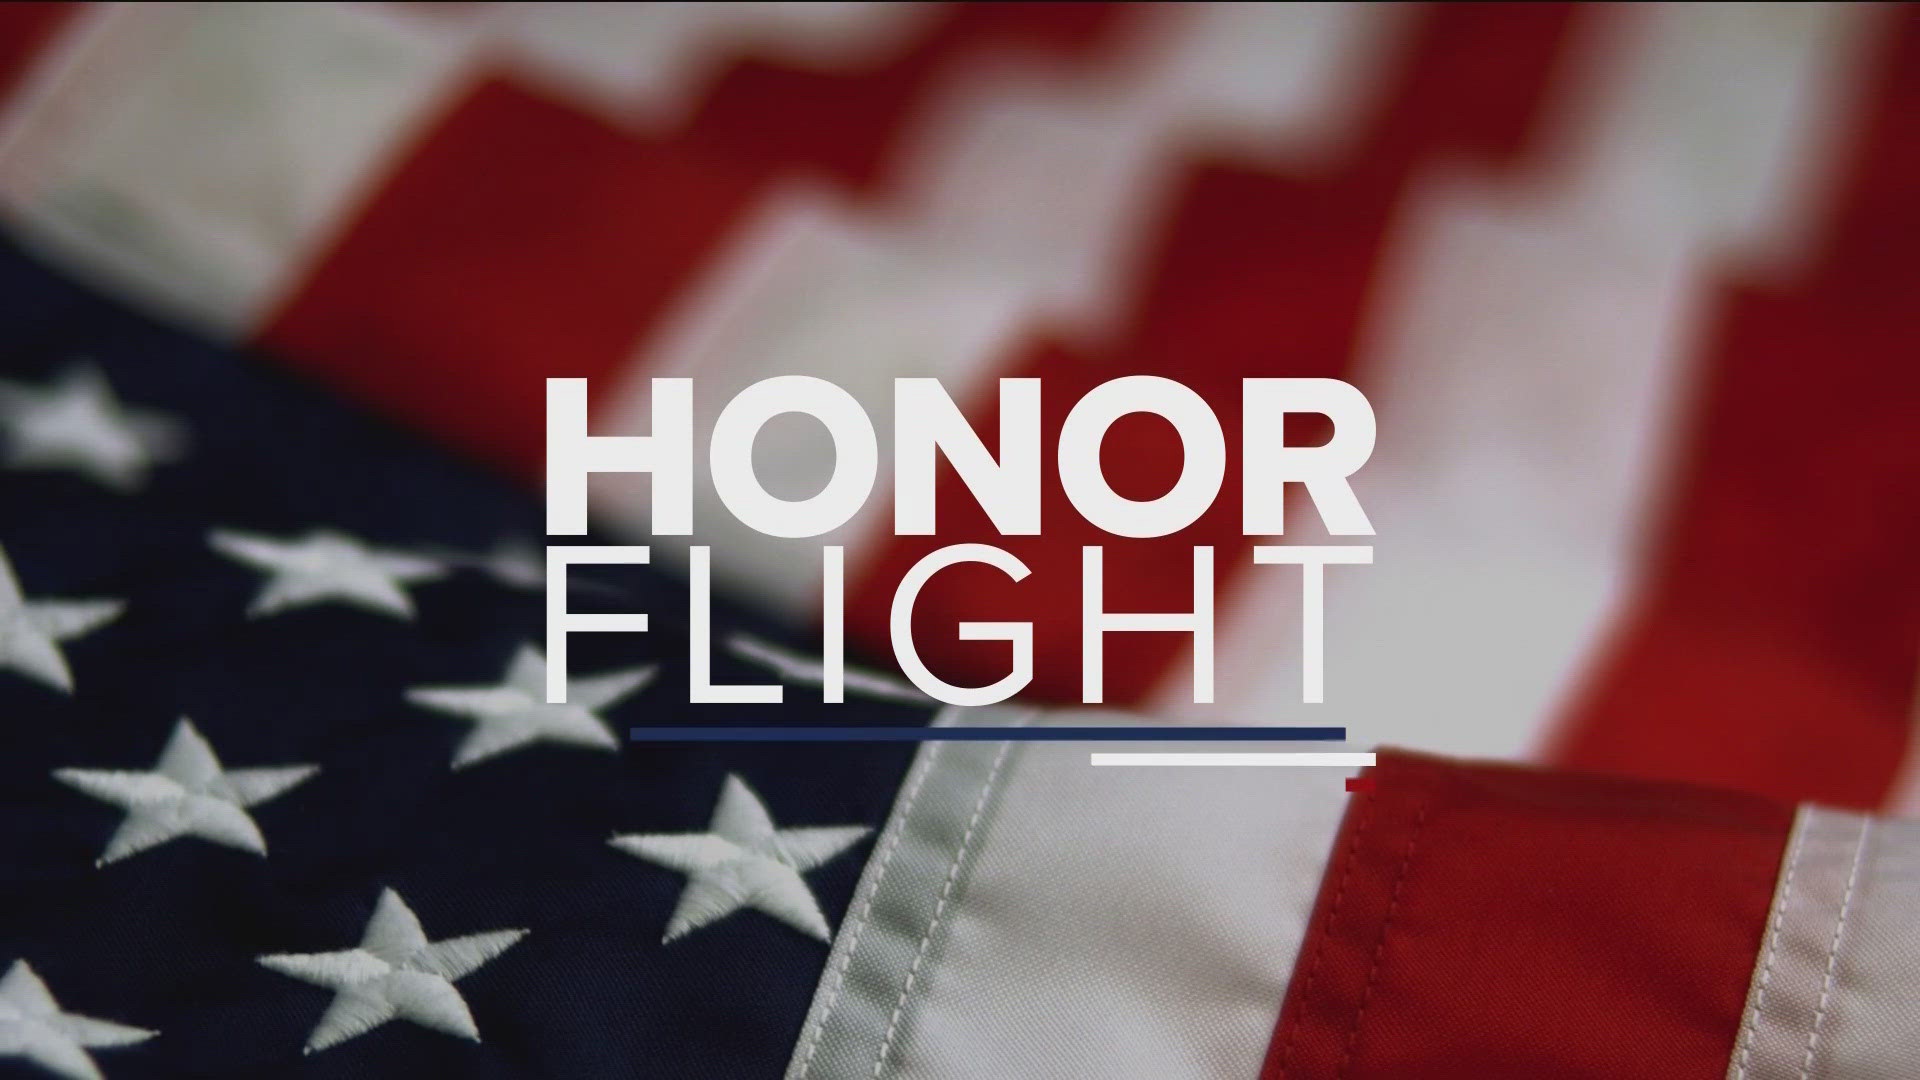 This will be the first in the "Honor Flight Network" with 90 combat veterans on board to visit their memorials around the nation's capital.